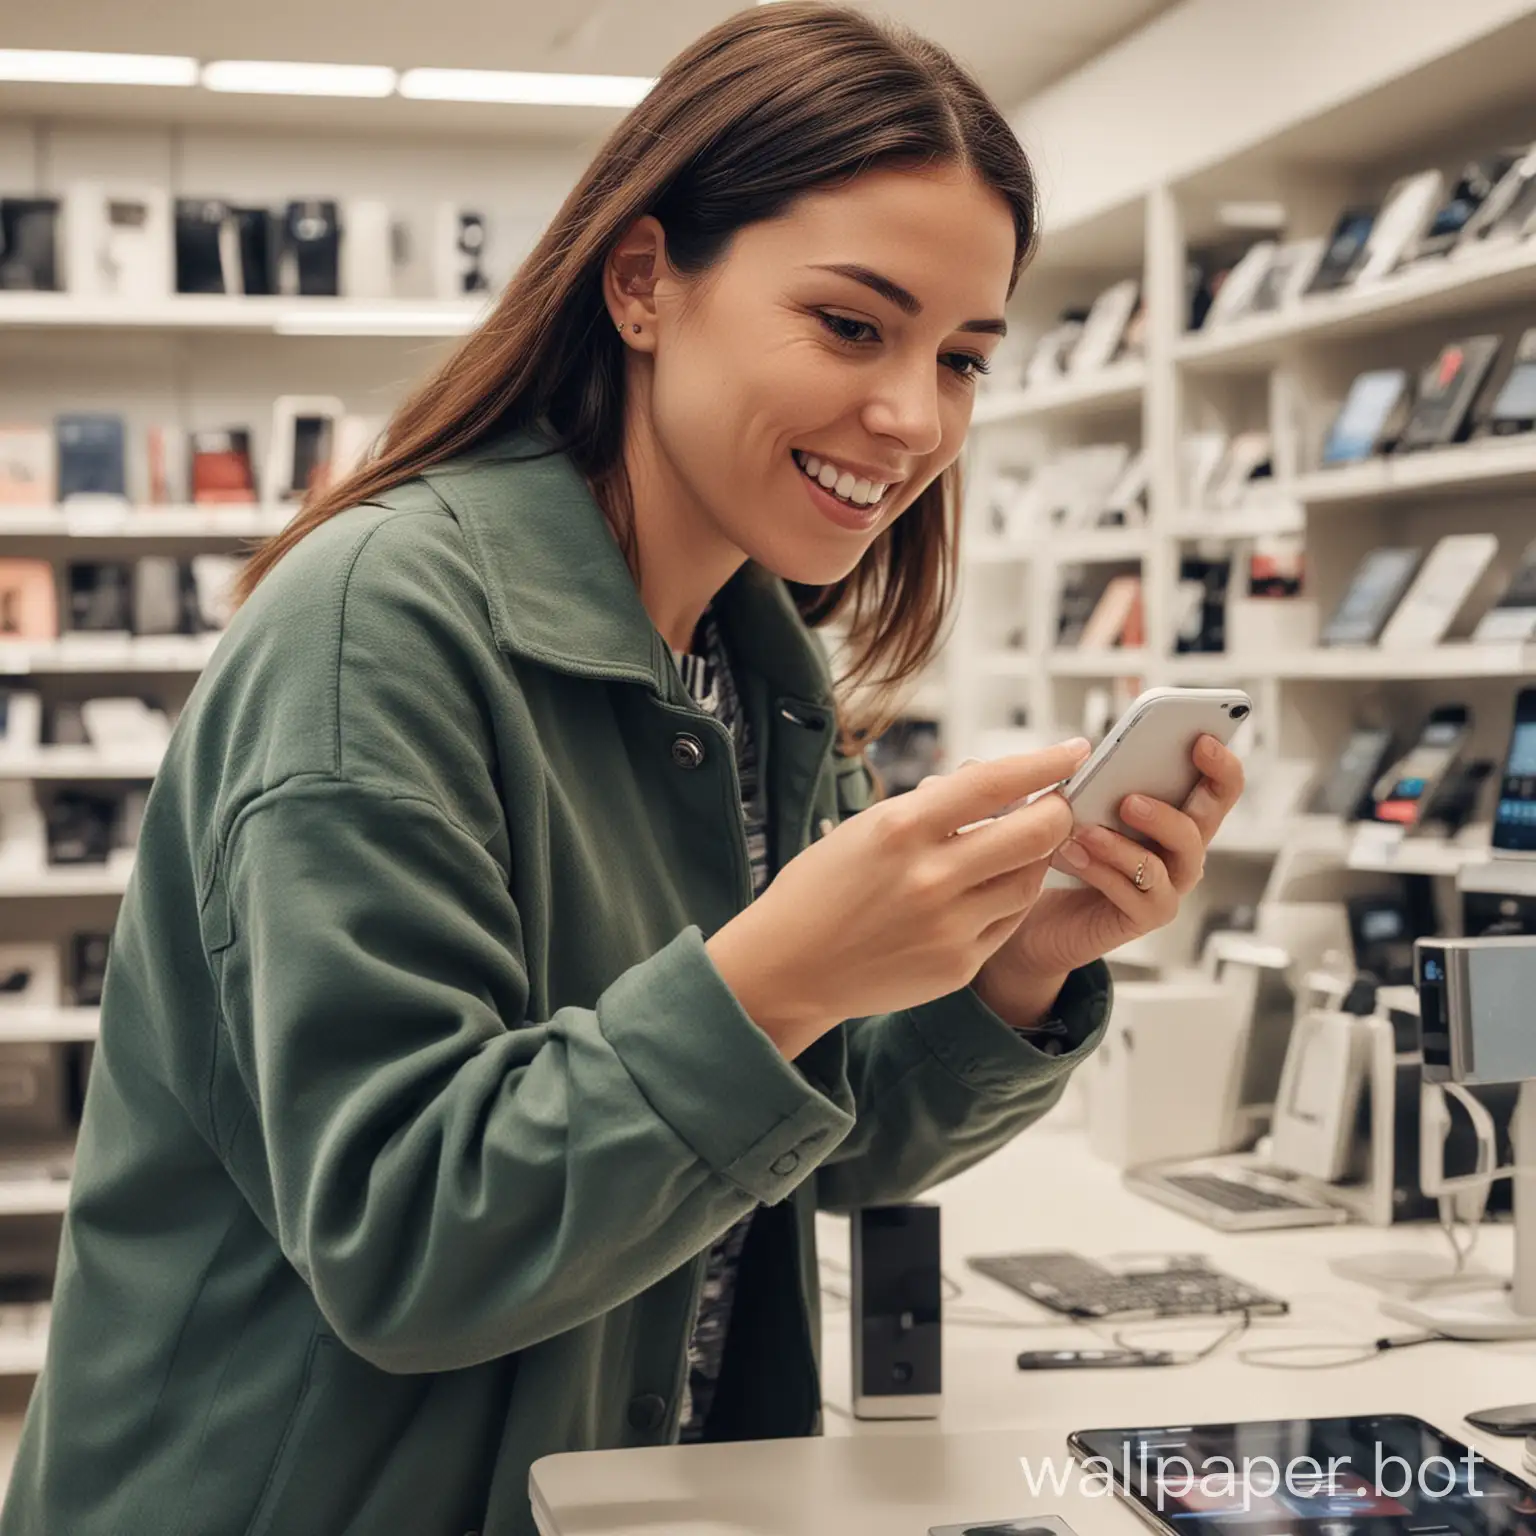 Generate an image of a customer buying a 
phone